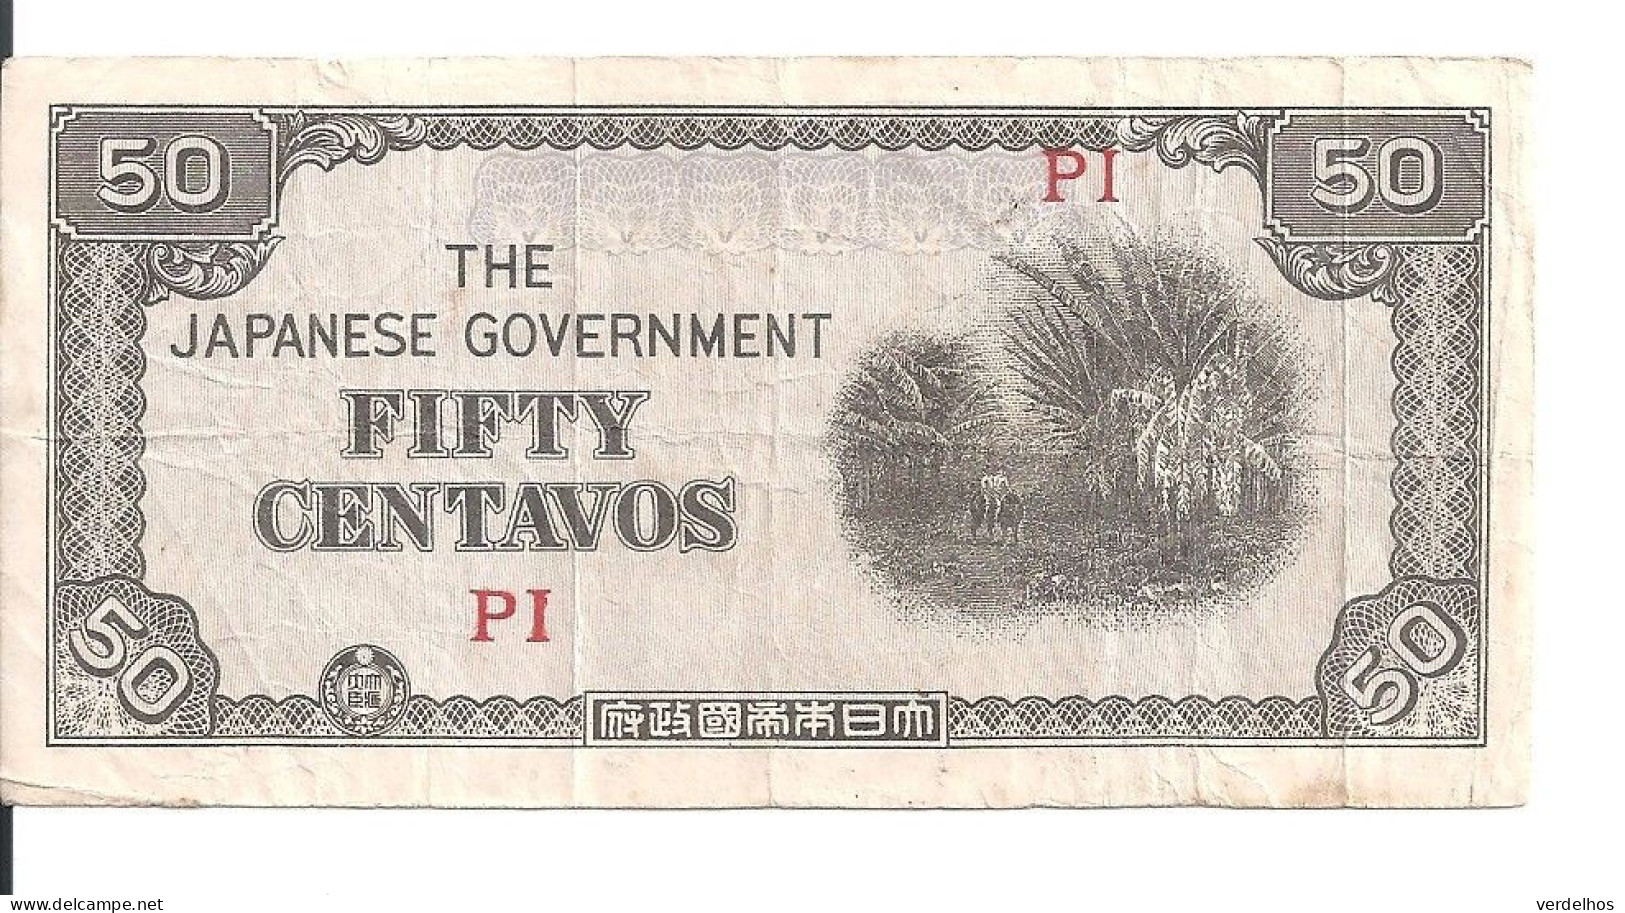 PHILIPPINES ( Japanese Goverment ) 50 CENTAVOS ND1942 VF P 105 - Philippines